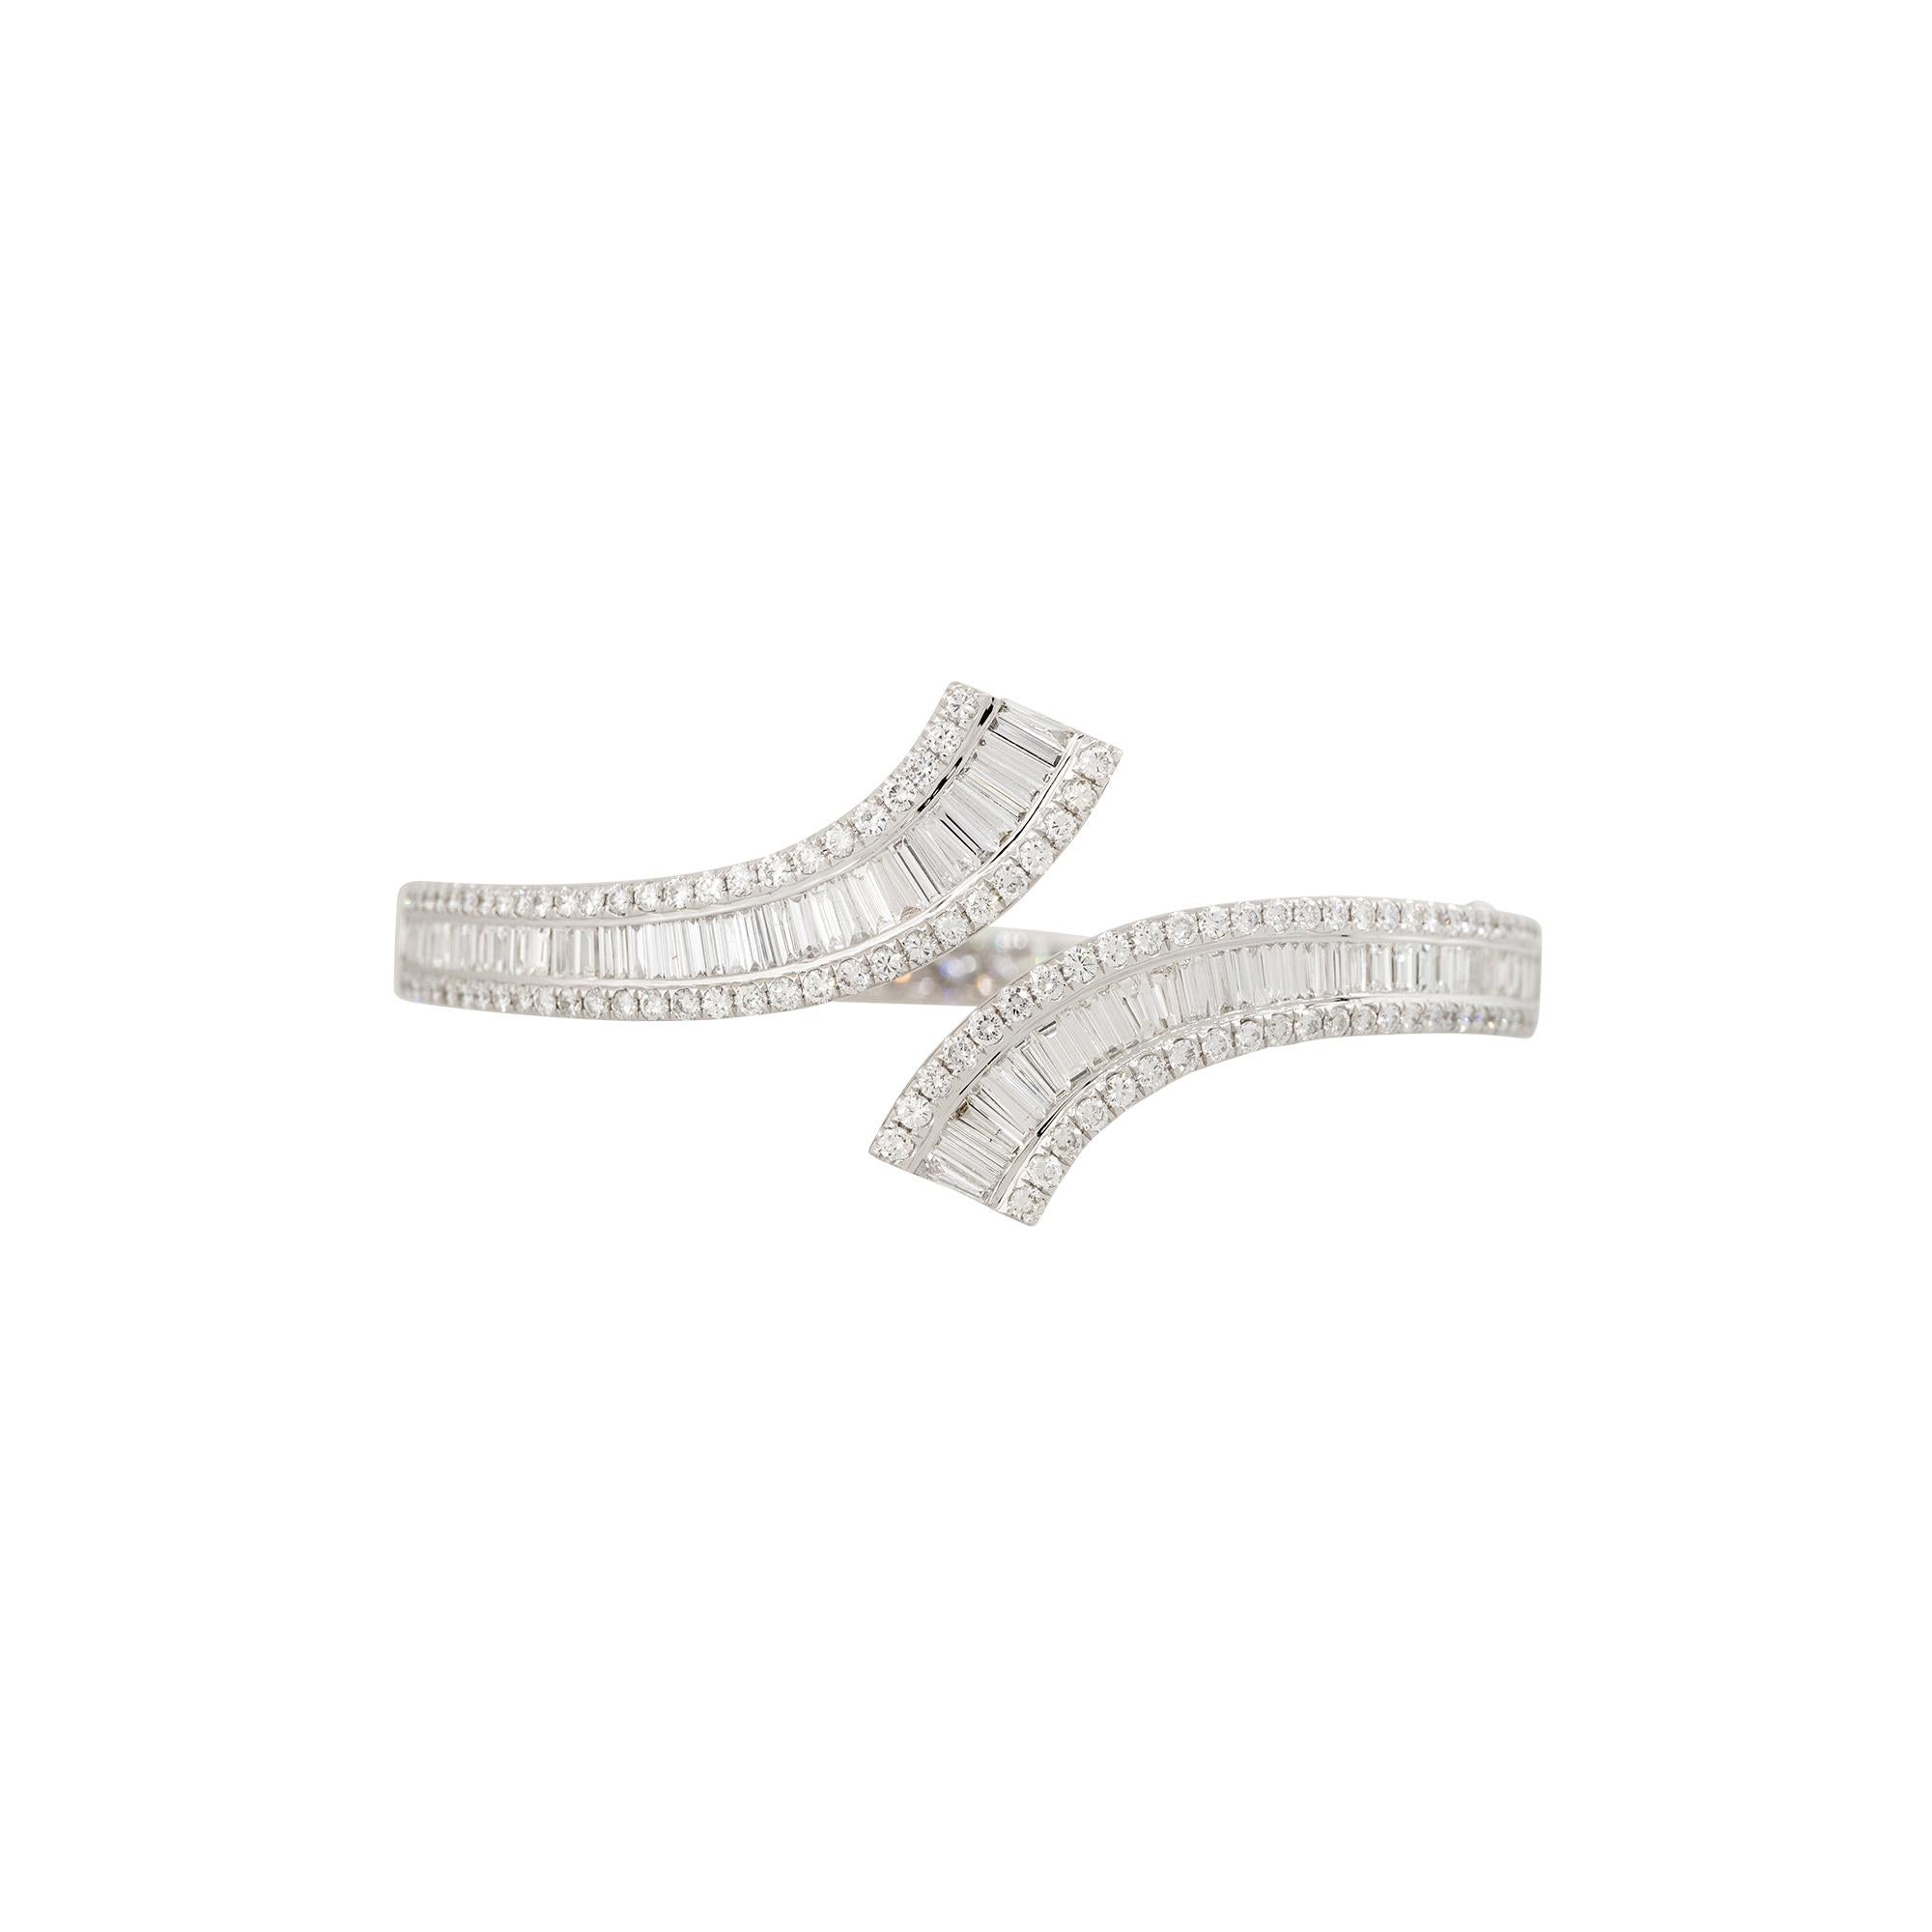 Product Style: Diamond Bypass Cuff Bracelet
Material: 18 Karat White Gold
Diamond Details: There are approximately 2.89 carats of Baguette cut diamonds (75 stones) and approximately 1.99 carats of Round Brilliant cut diamonds (112 stones). The total